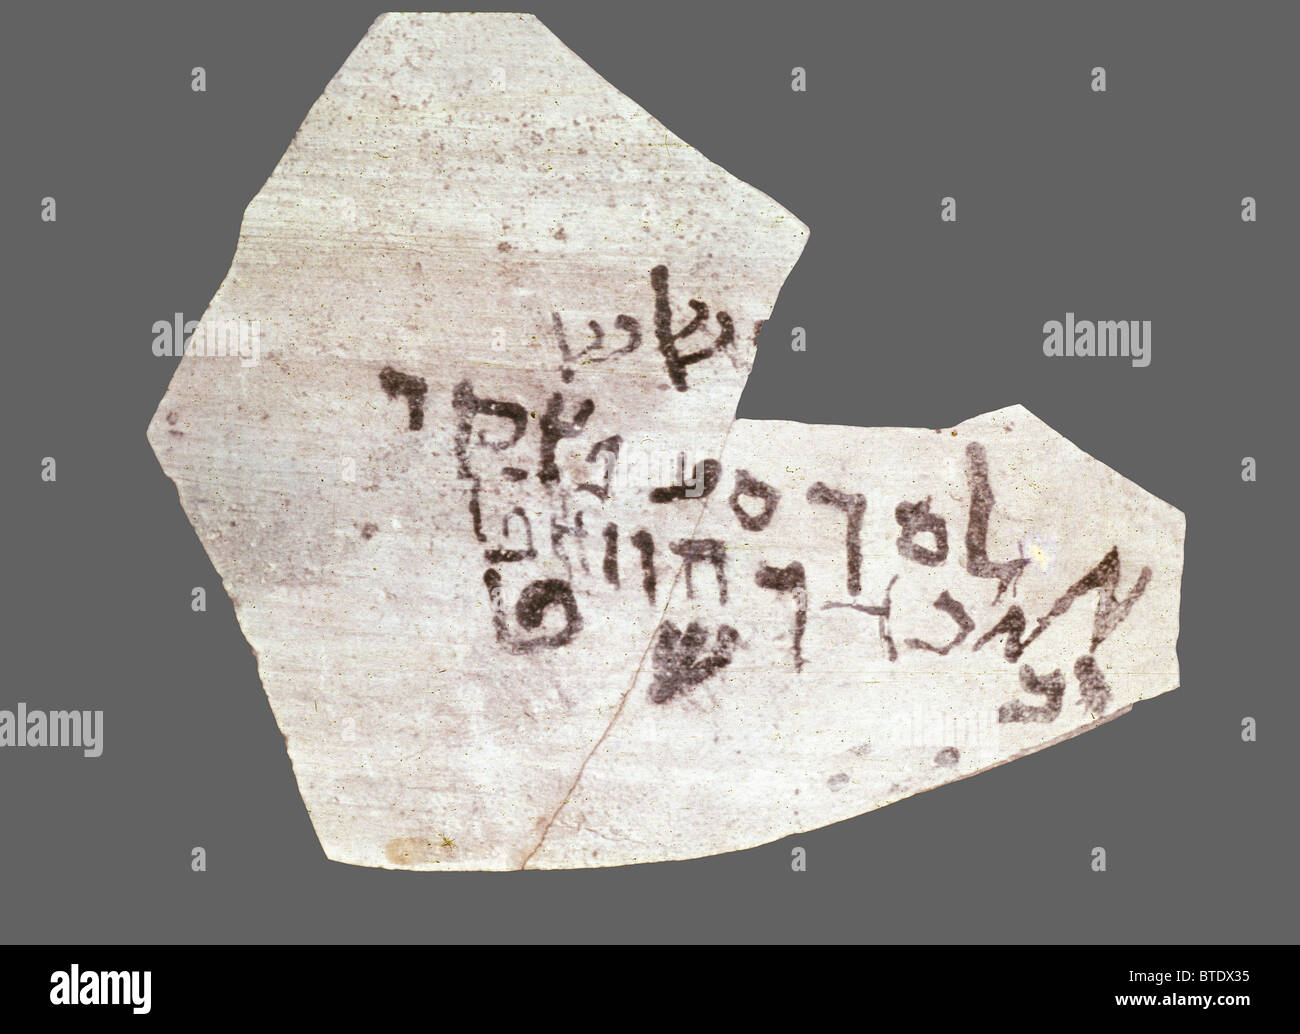 5364. Ostraca found in Qumran dating from 1st. C. BC. The writing is in square Hebrew and it contains all the letters of the Stock Photo